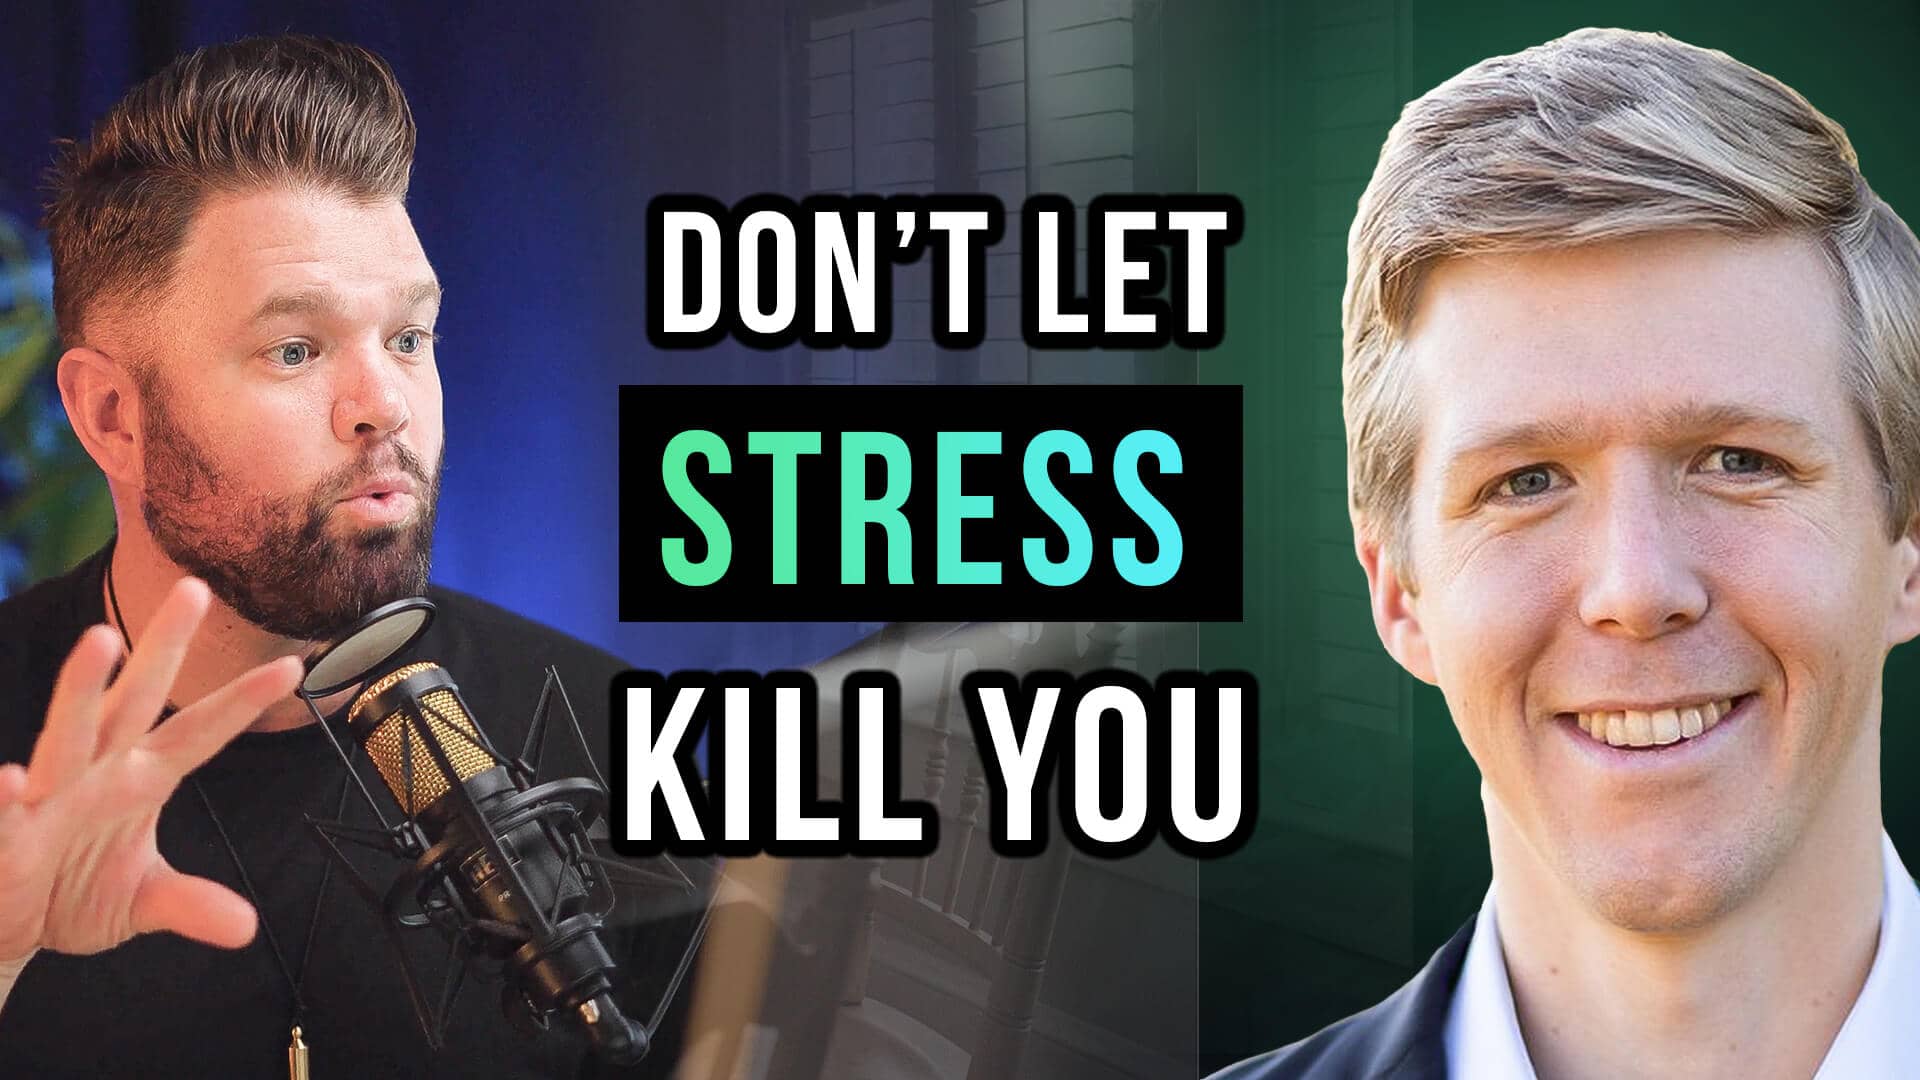 Leland Stillman MD | Secrets of Stress-Disease Connection: The Truth About Psychoneuroimmunology + How To Be Well For Life